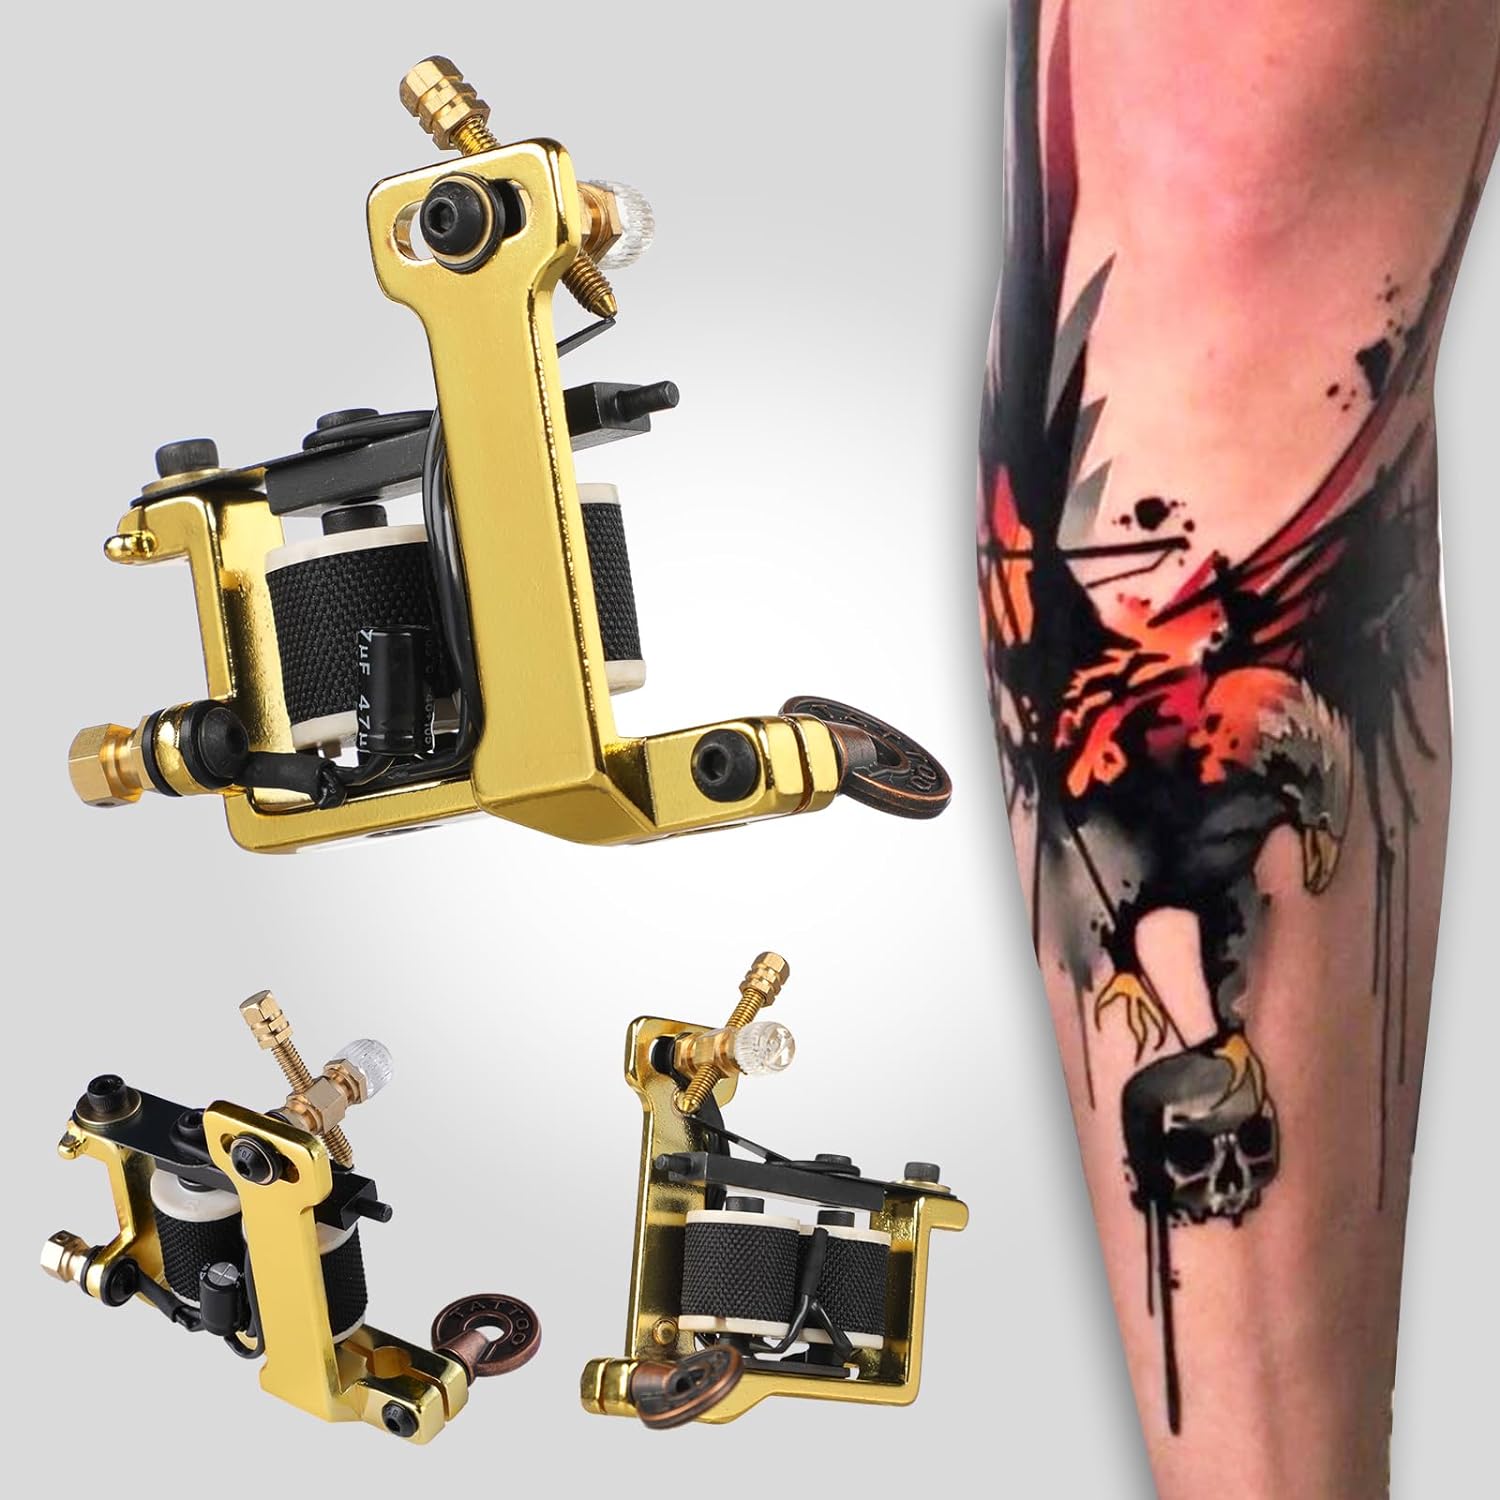 Prinker's Awesome Tattoo Printer Inks You Instantly, But Not Forever |  Digital Trends